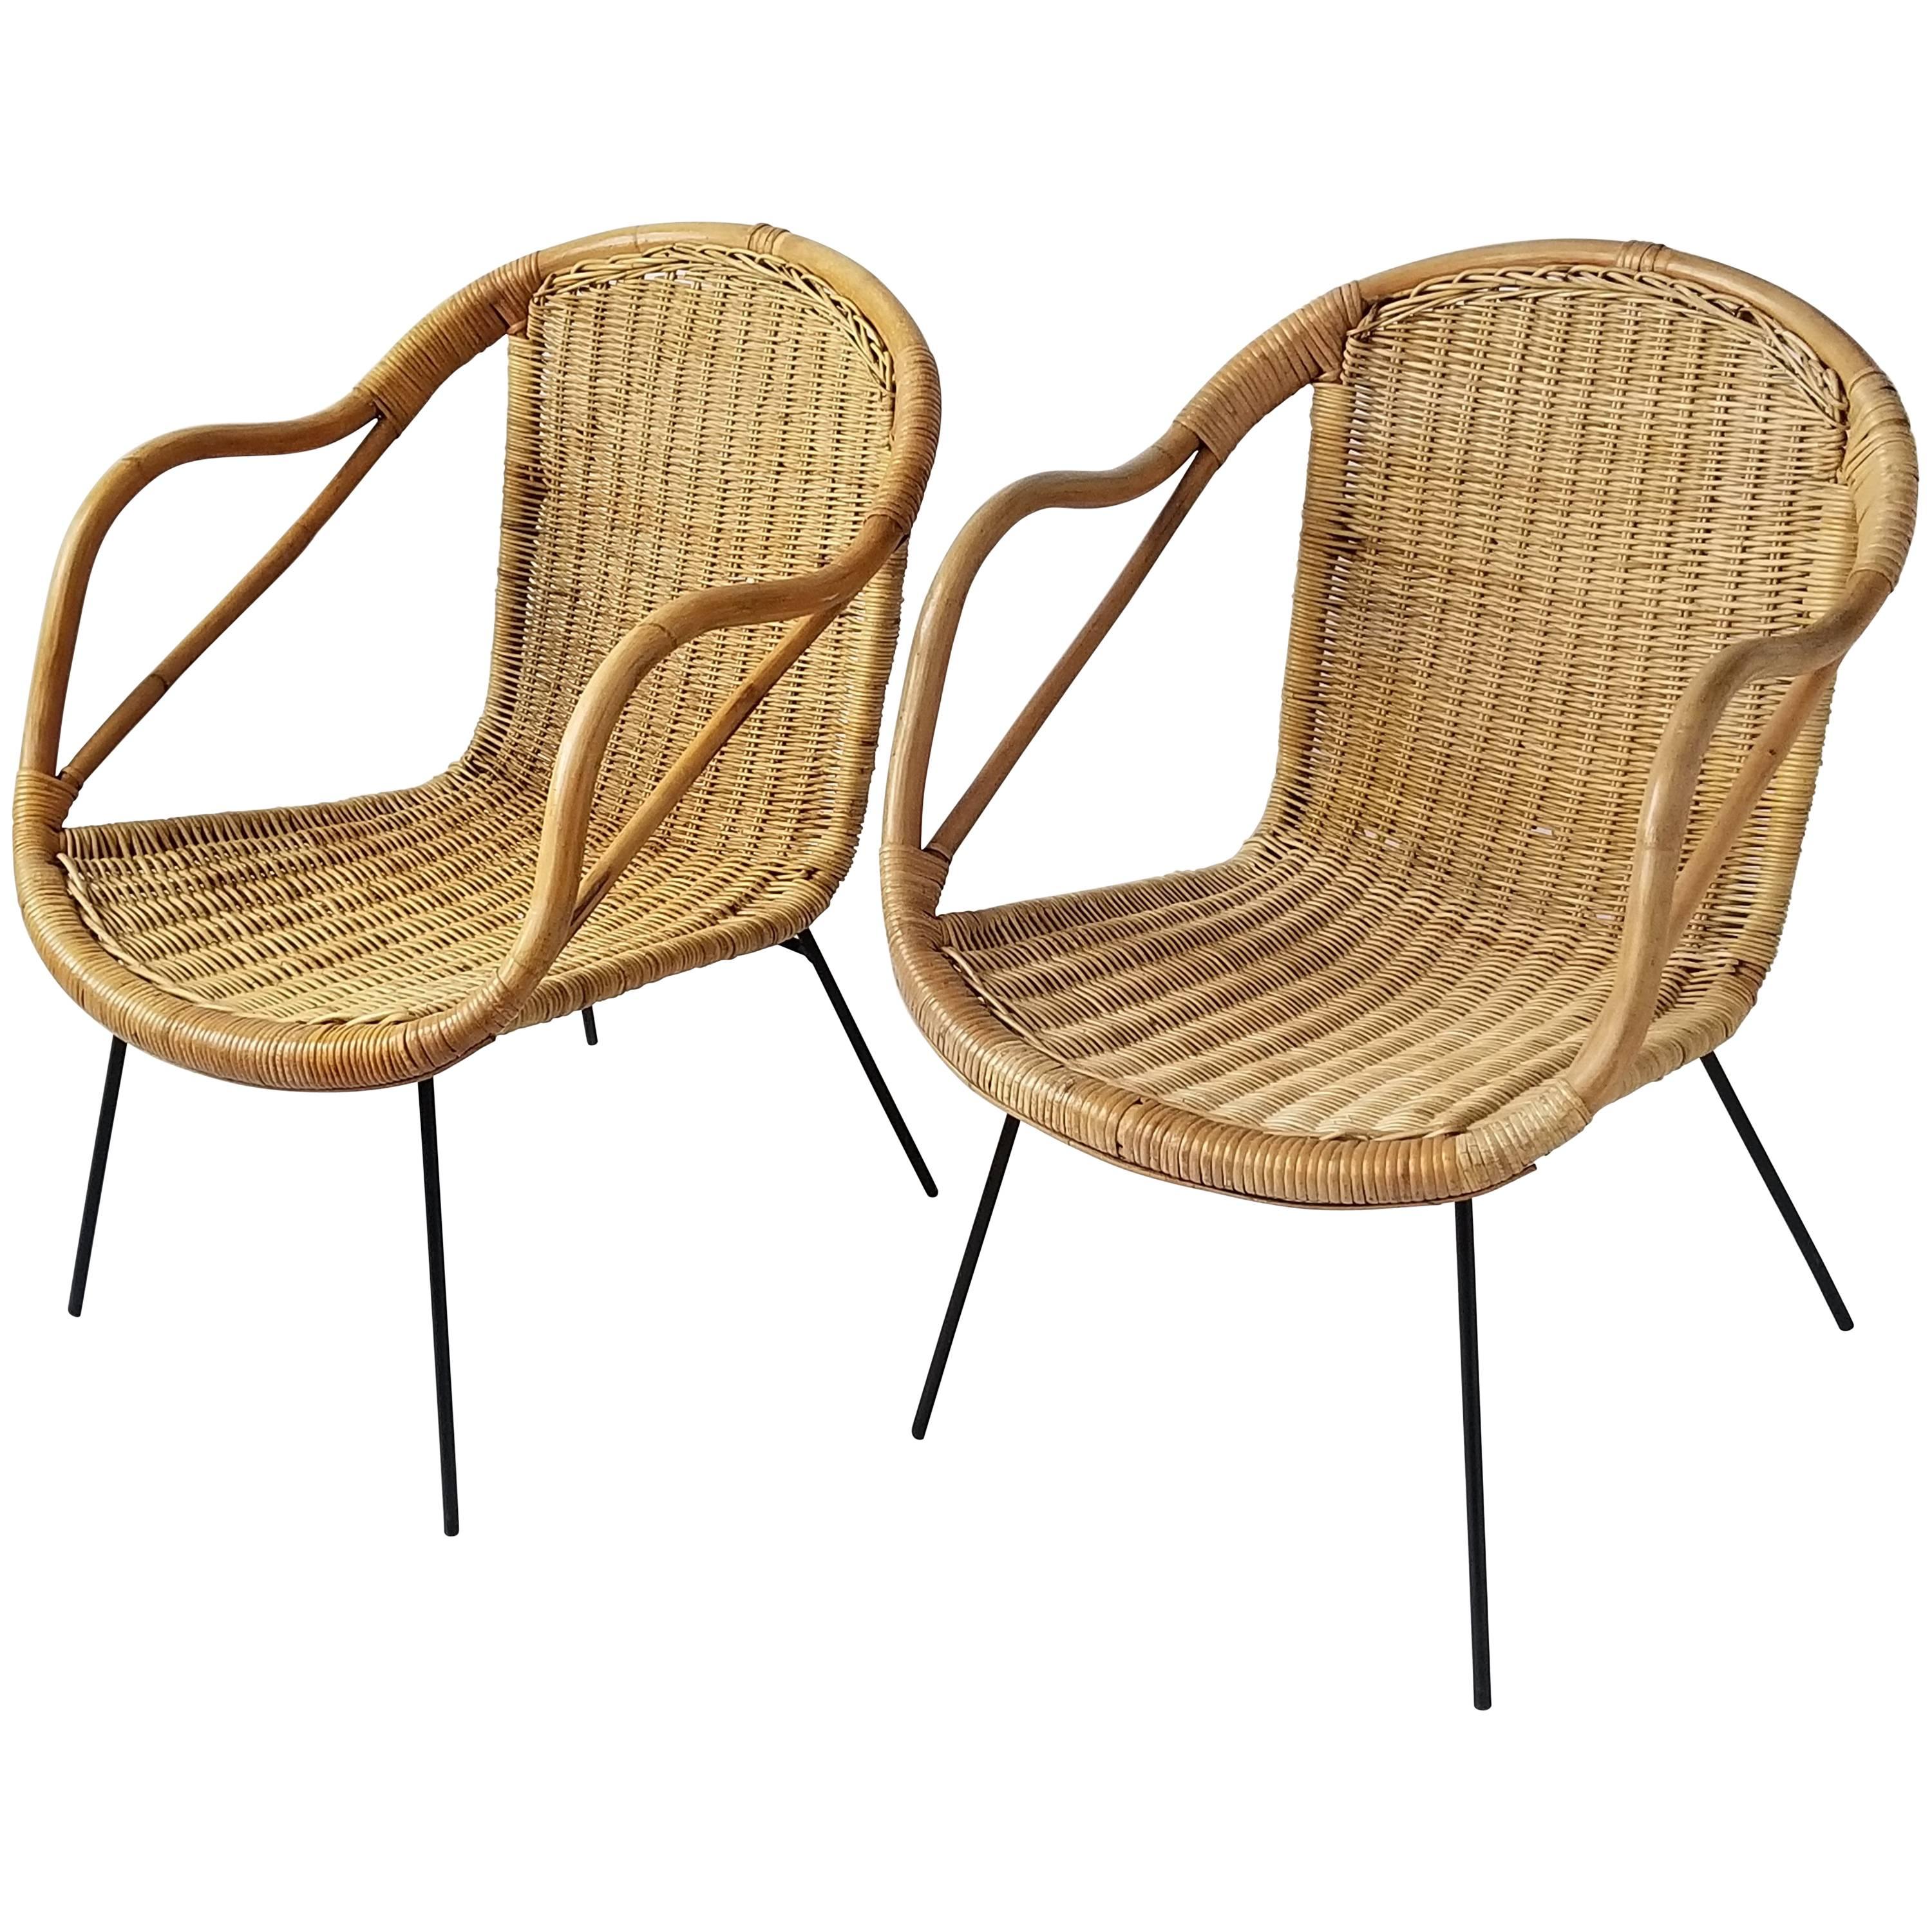 1950s, Wicker Chair on Iron Legs and Structure, Italia 